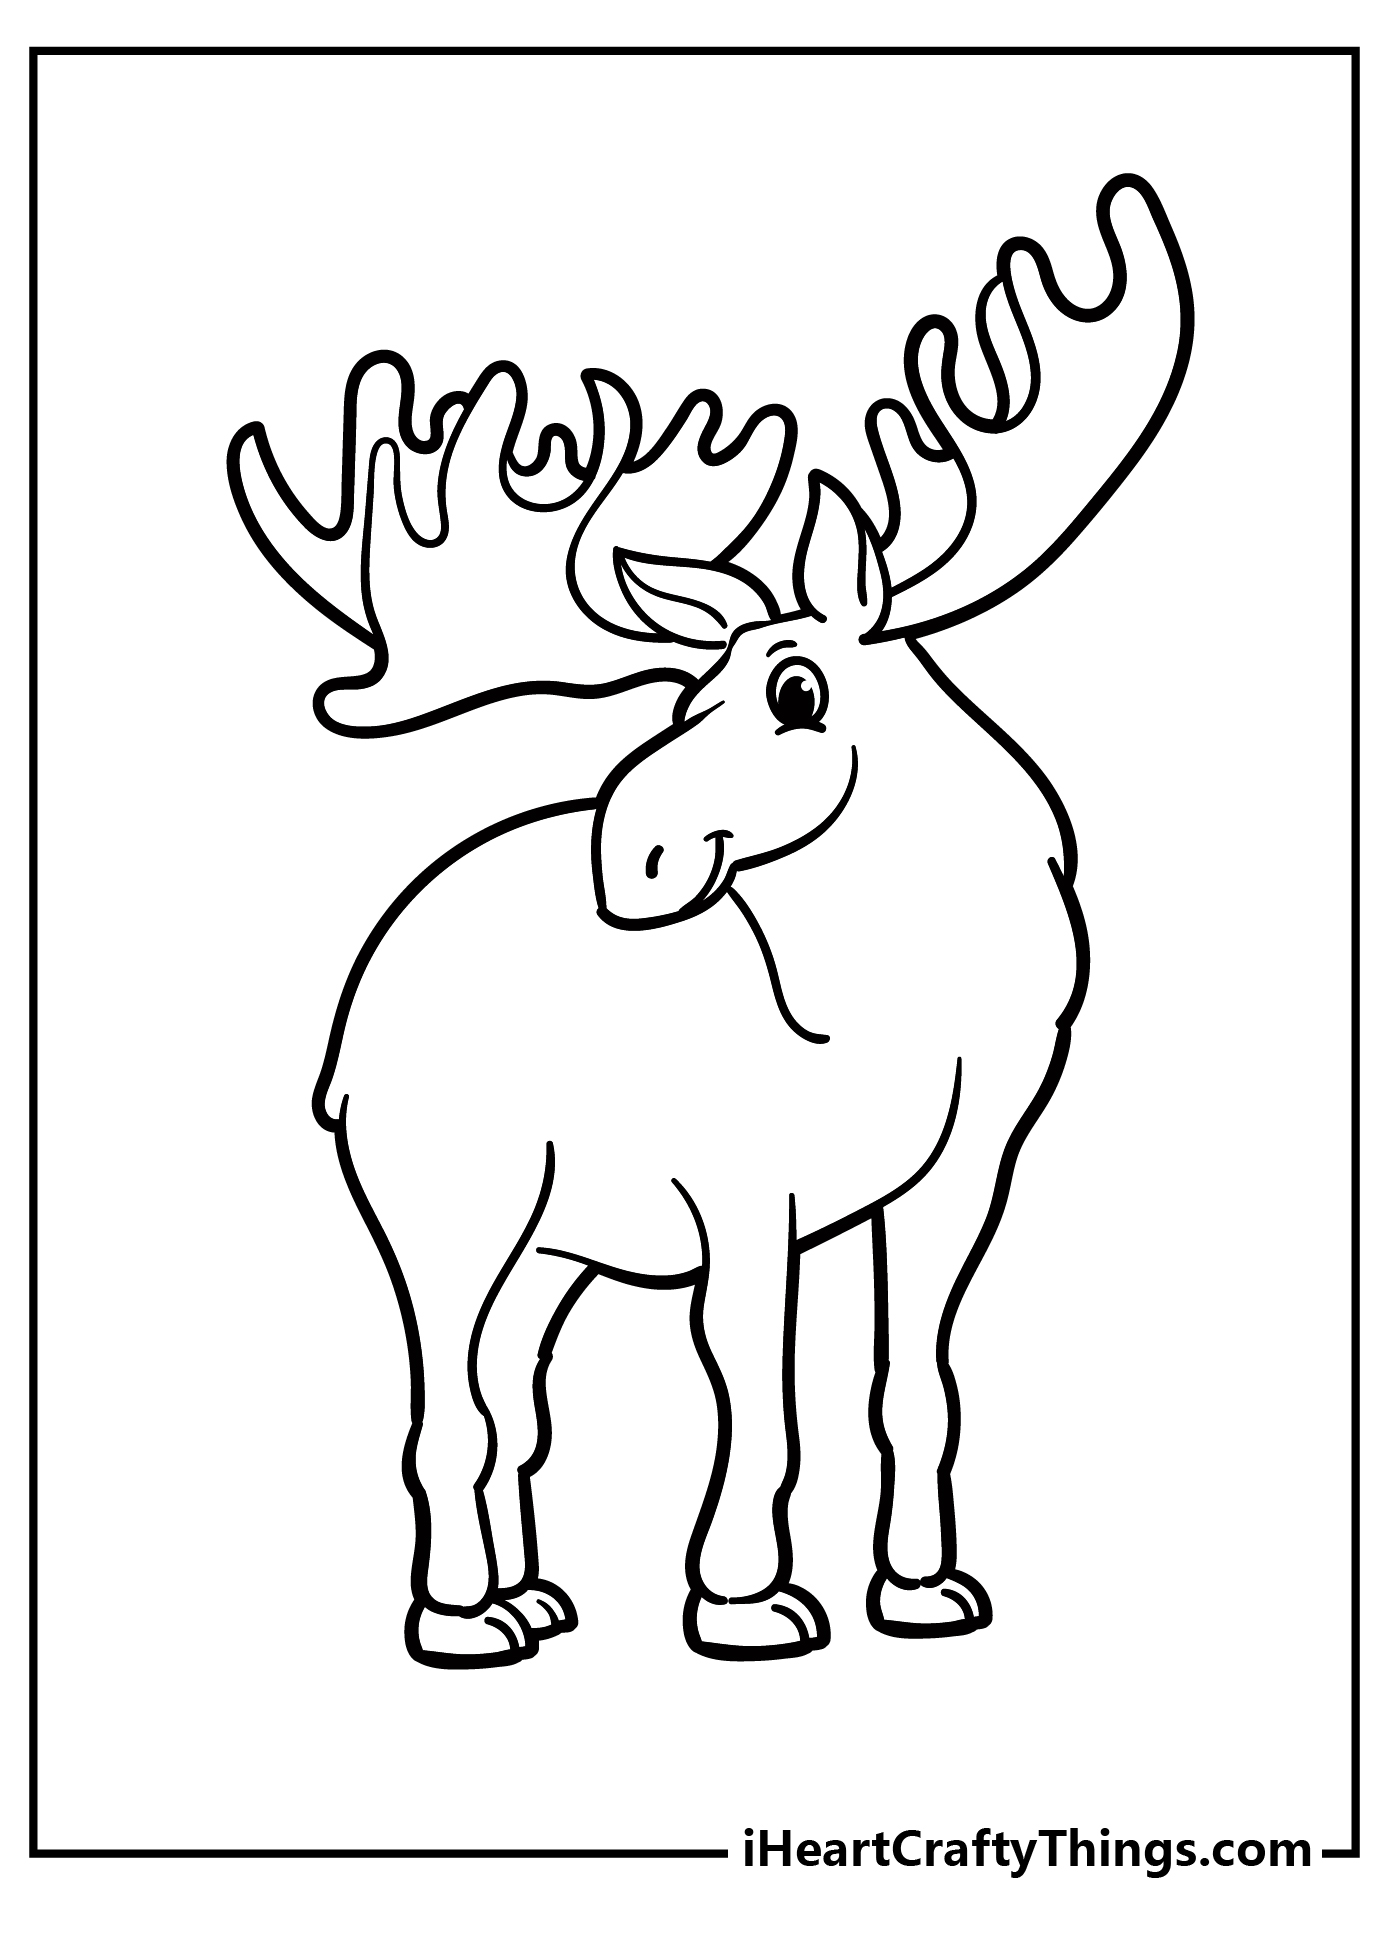 Printable Moose Coloring Pages Updated 20